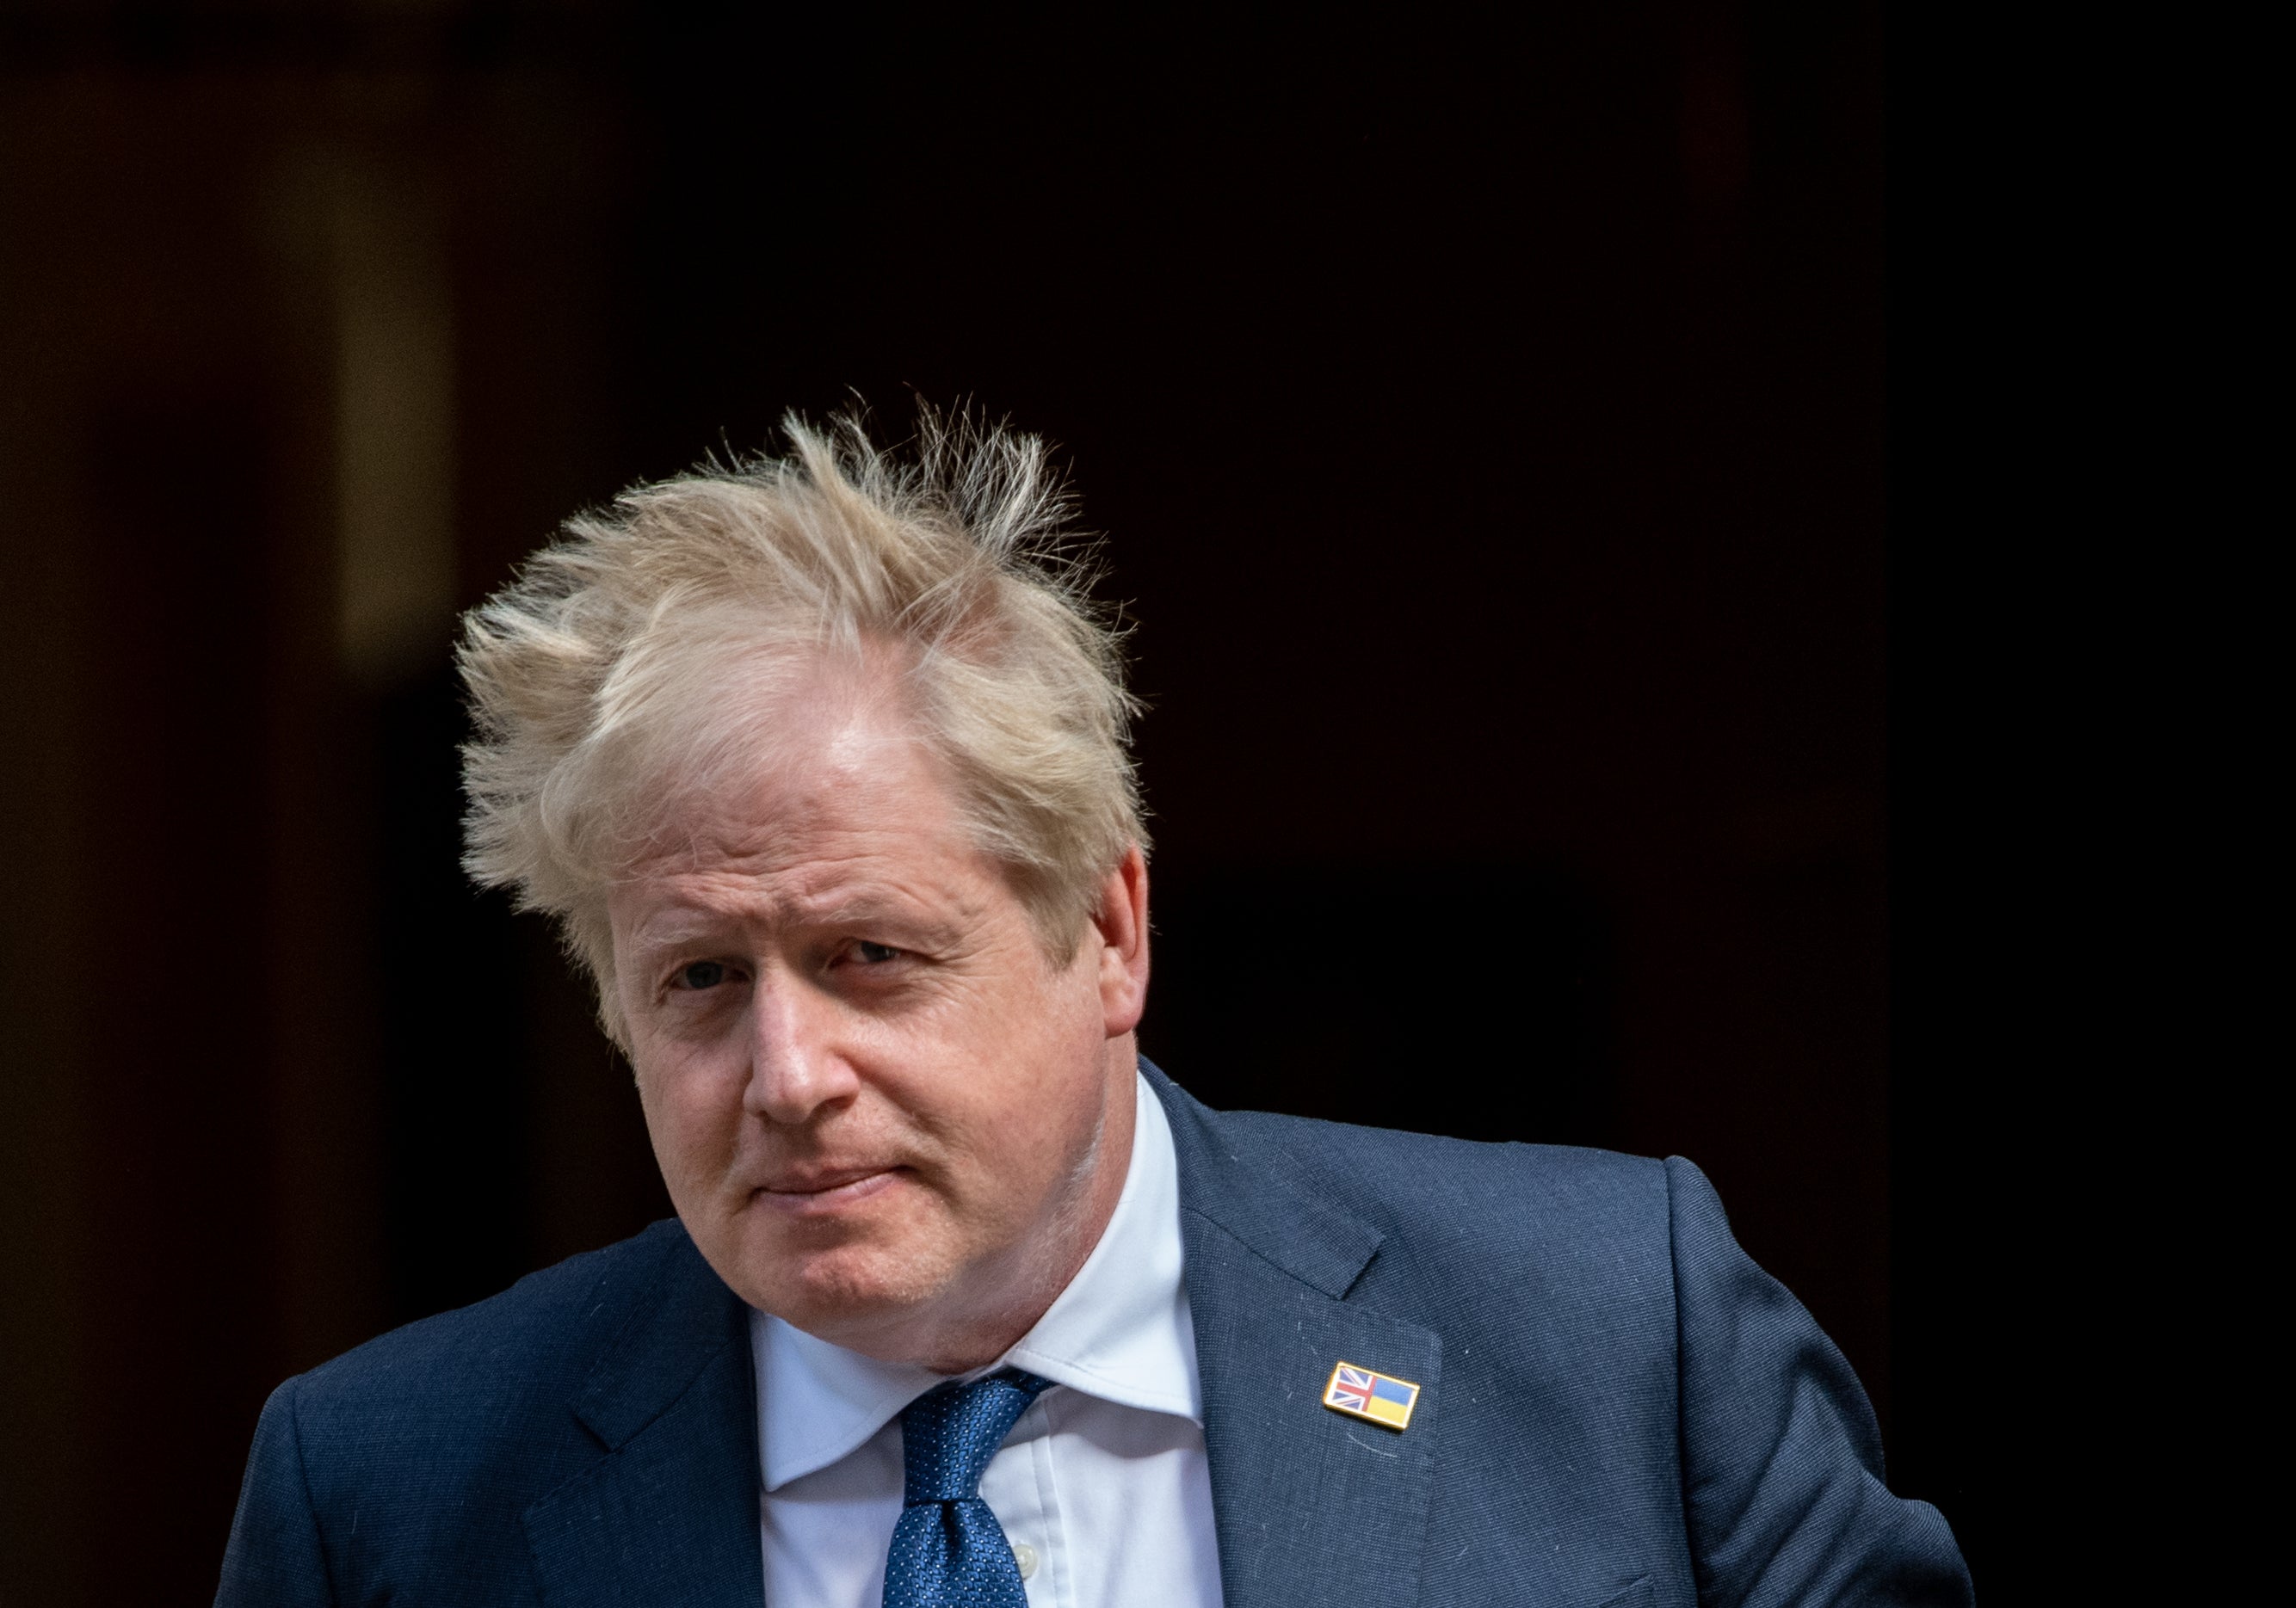 New poll shows 27 per cent of voters who backed the Tories in 2019 general election are less likely to do so again if Boris Johnson remains leader